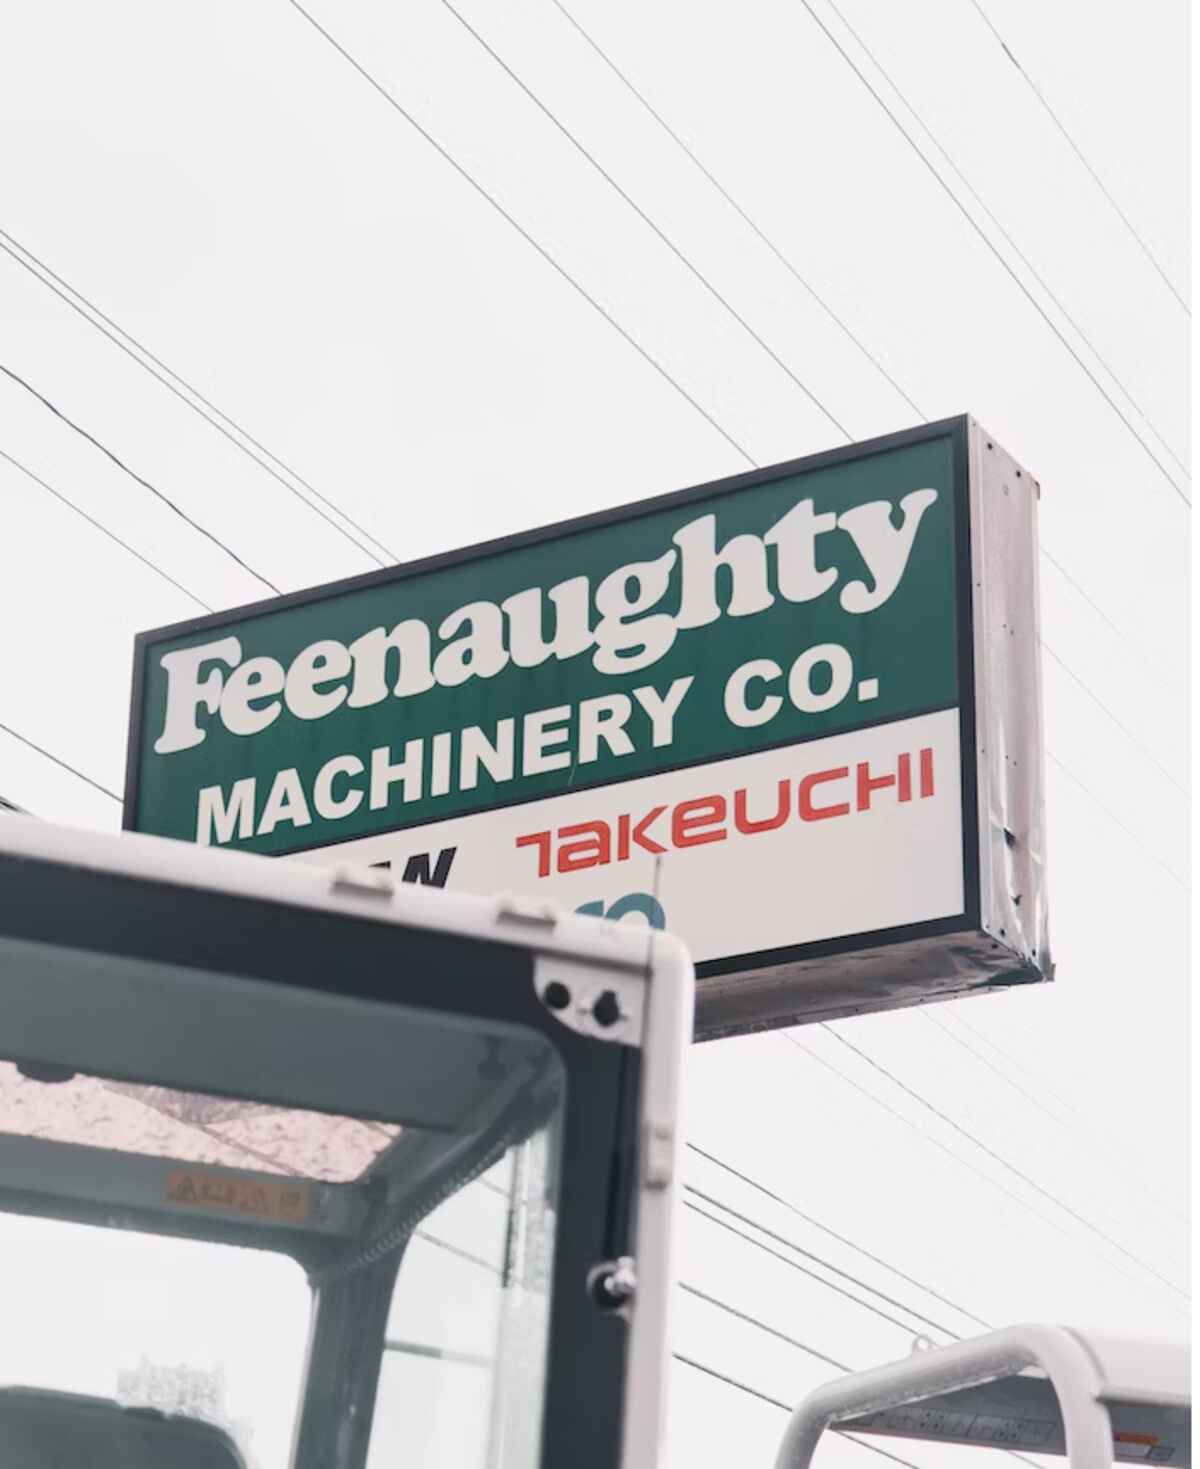 Feenaughty Machinery: Answering Contractors' Calls for 120 Years